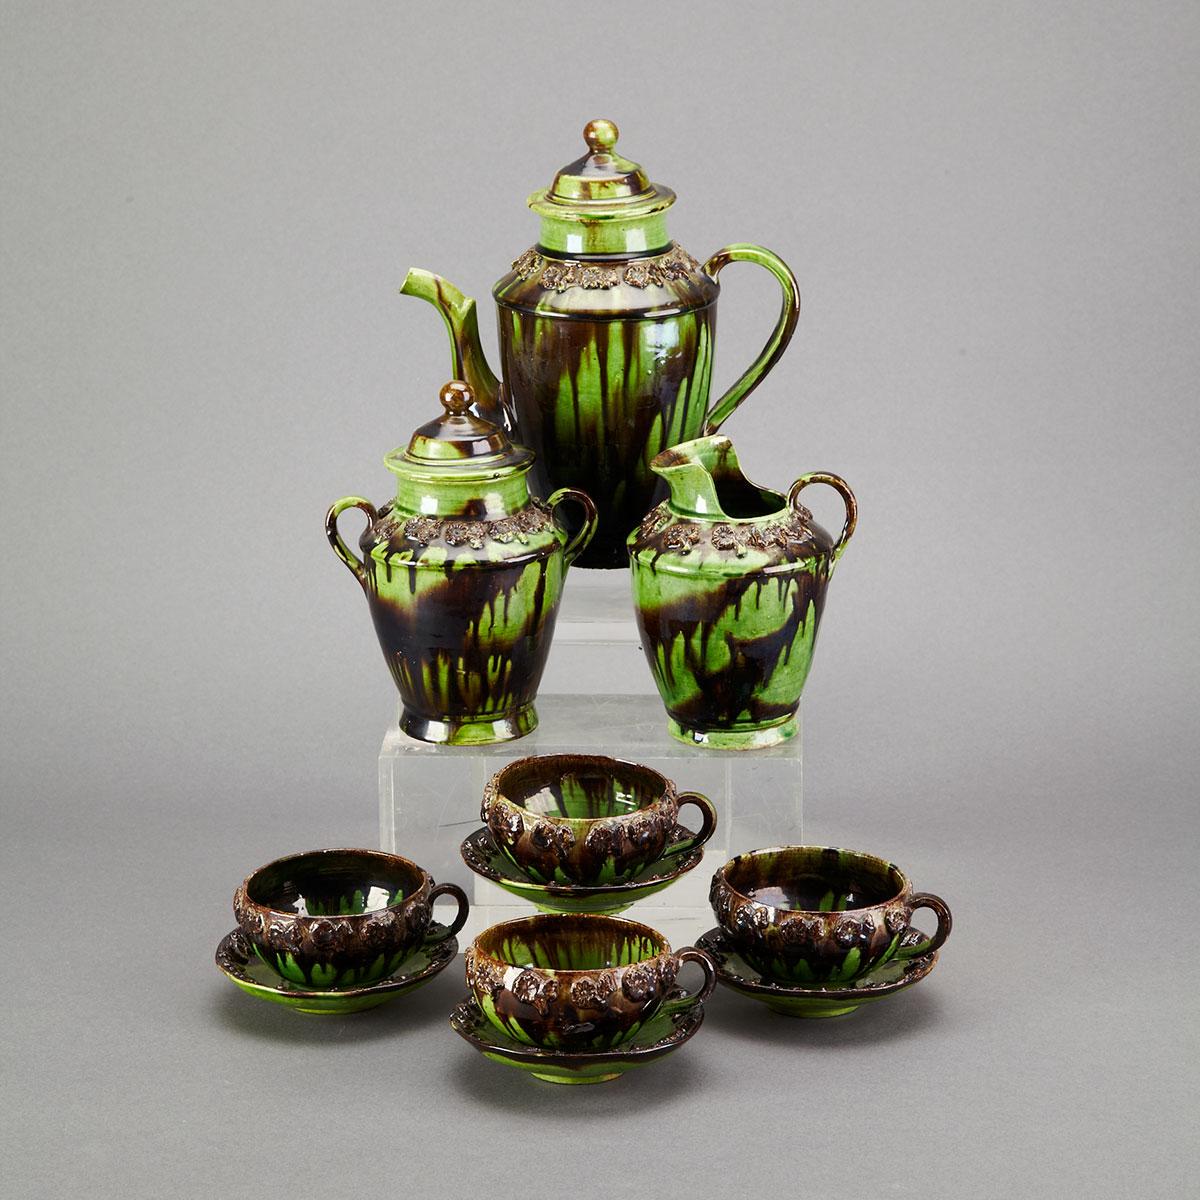 Green and Brown Running Glazed Earthenware Coffee Service, 19th/early 20th century